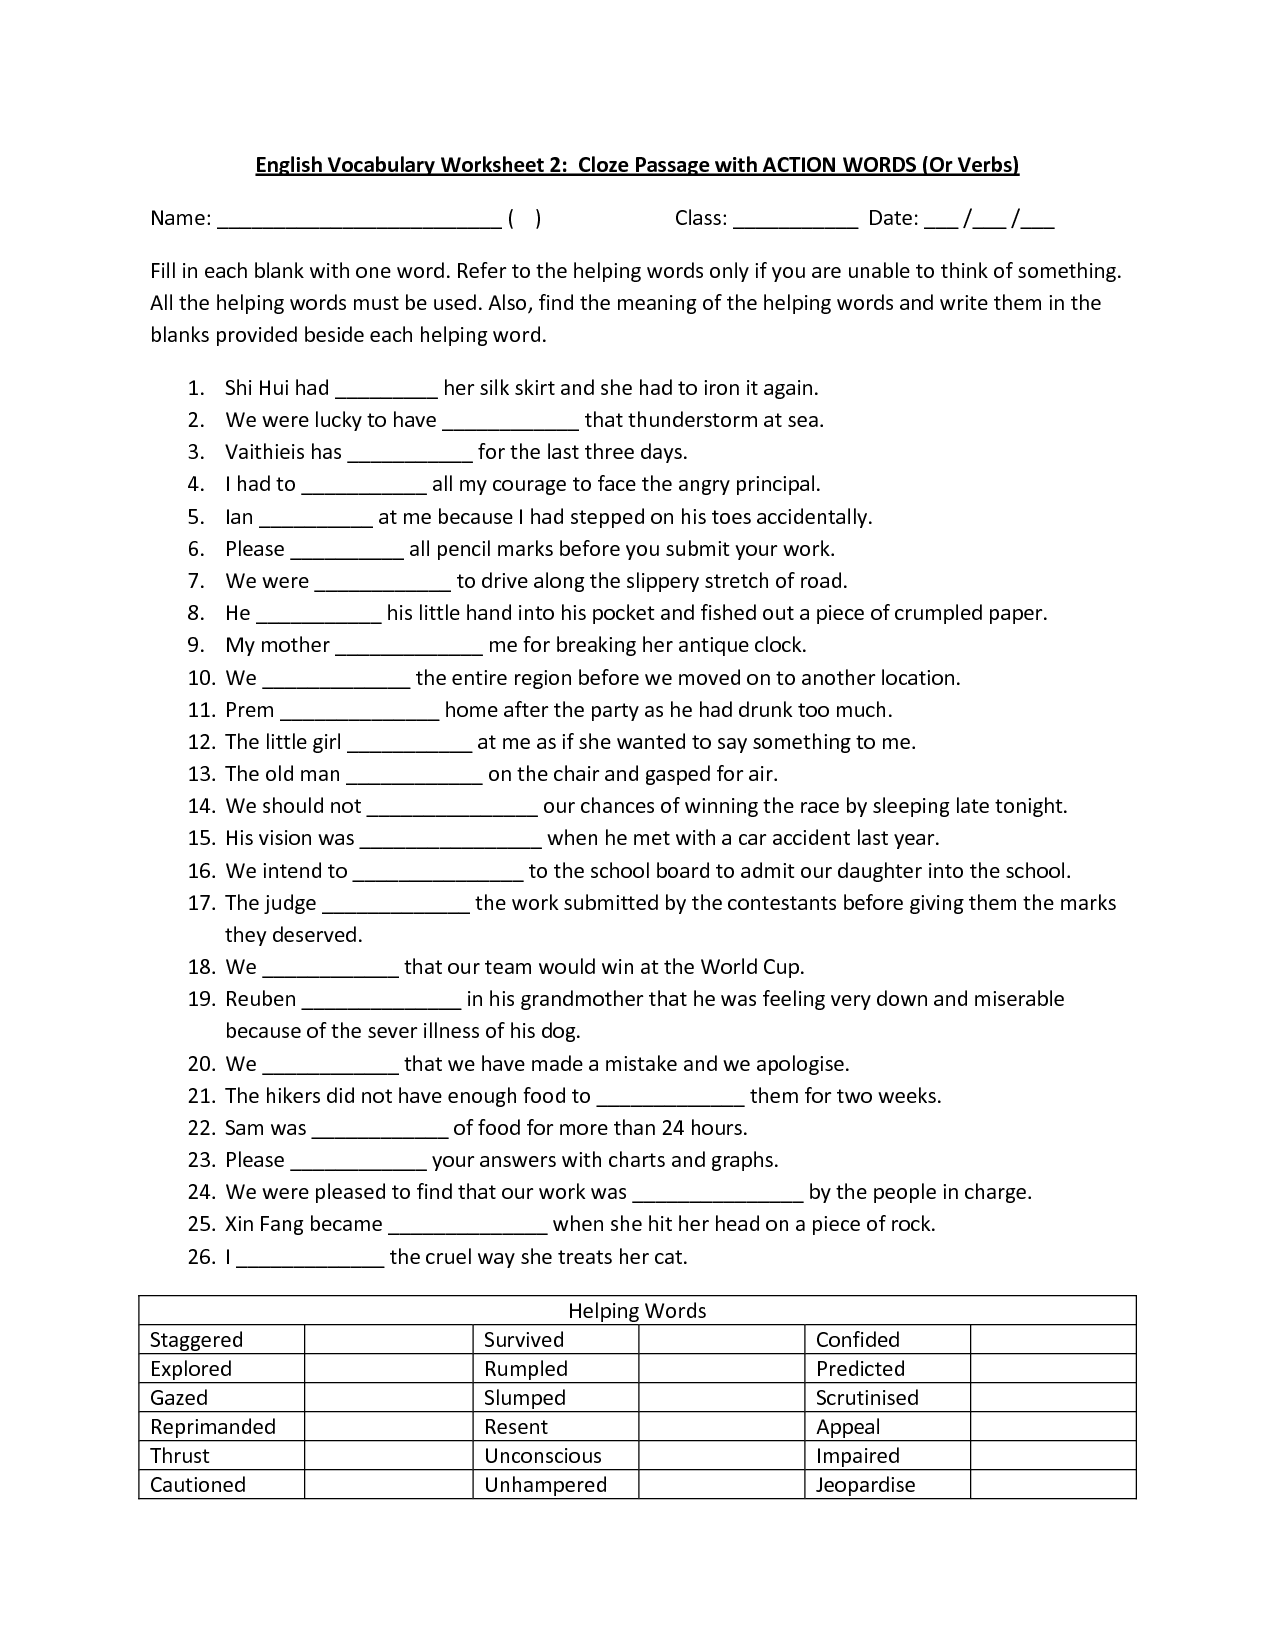 15-best-images-of-action-words-worksheet-action-words-worksheets-kindergarten-action-words